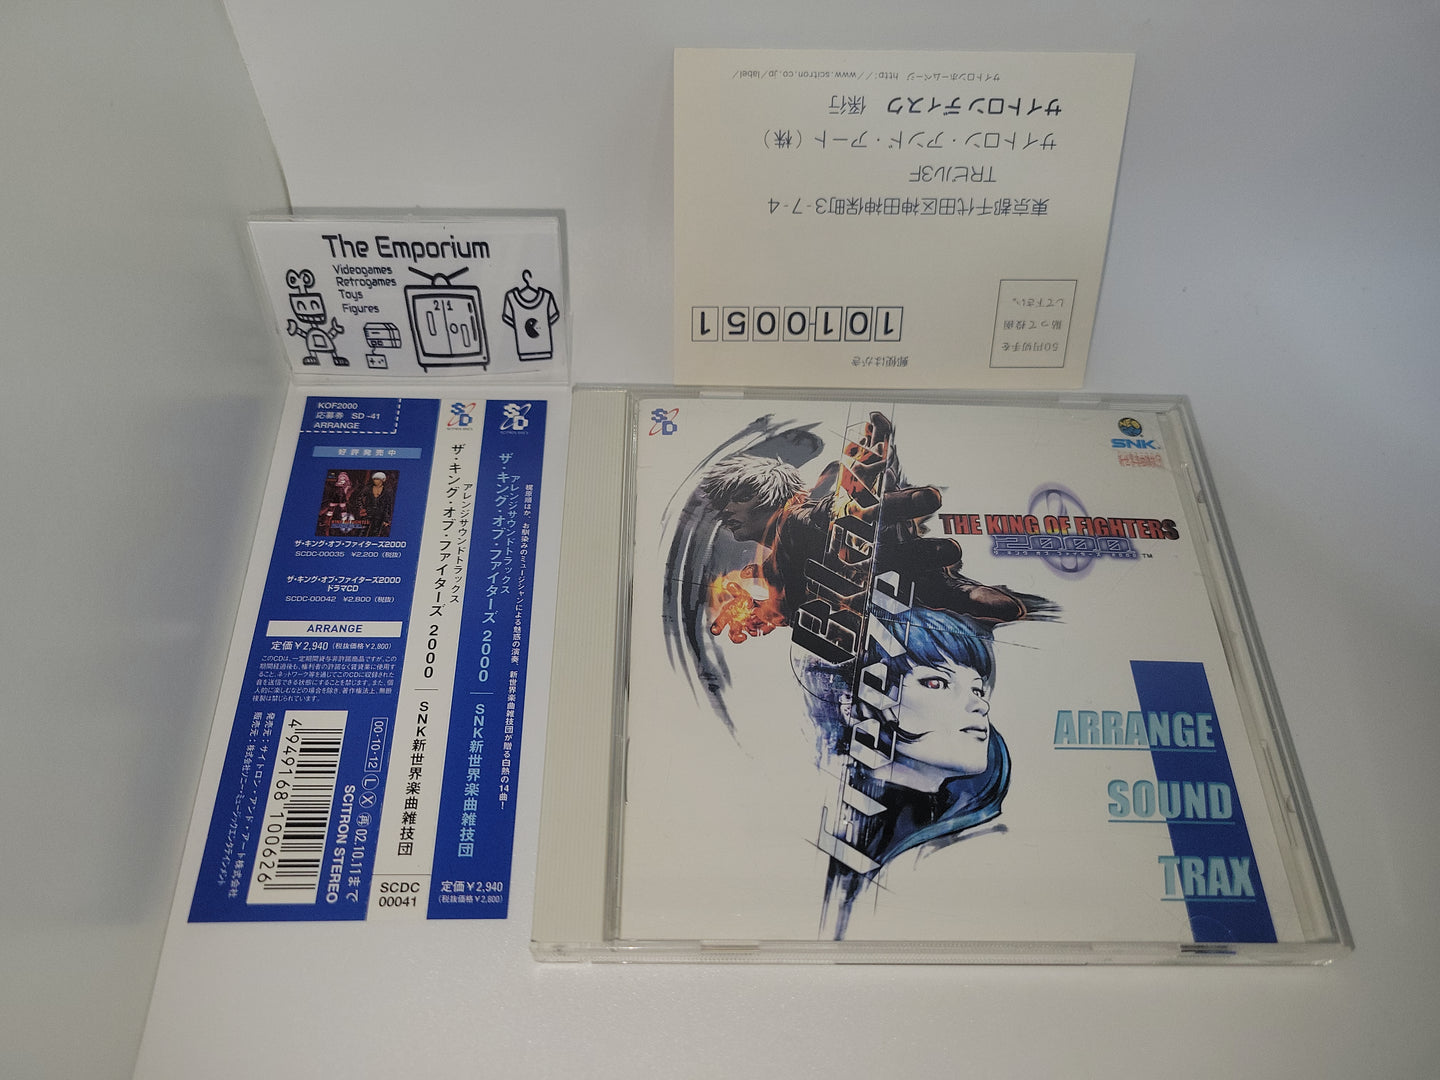 THE KING OF FIGHTERS 2000 ARRANGE SOUND TRAX - Music cd soundtrack